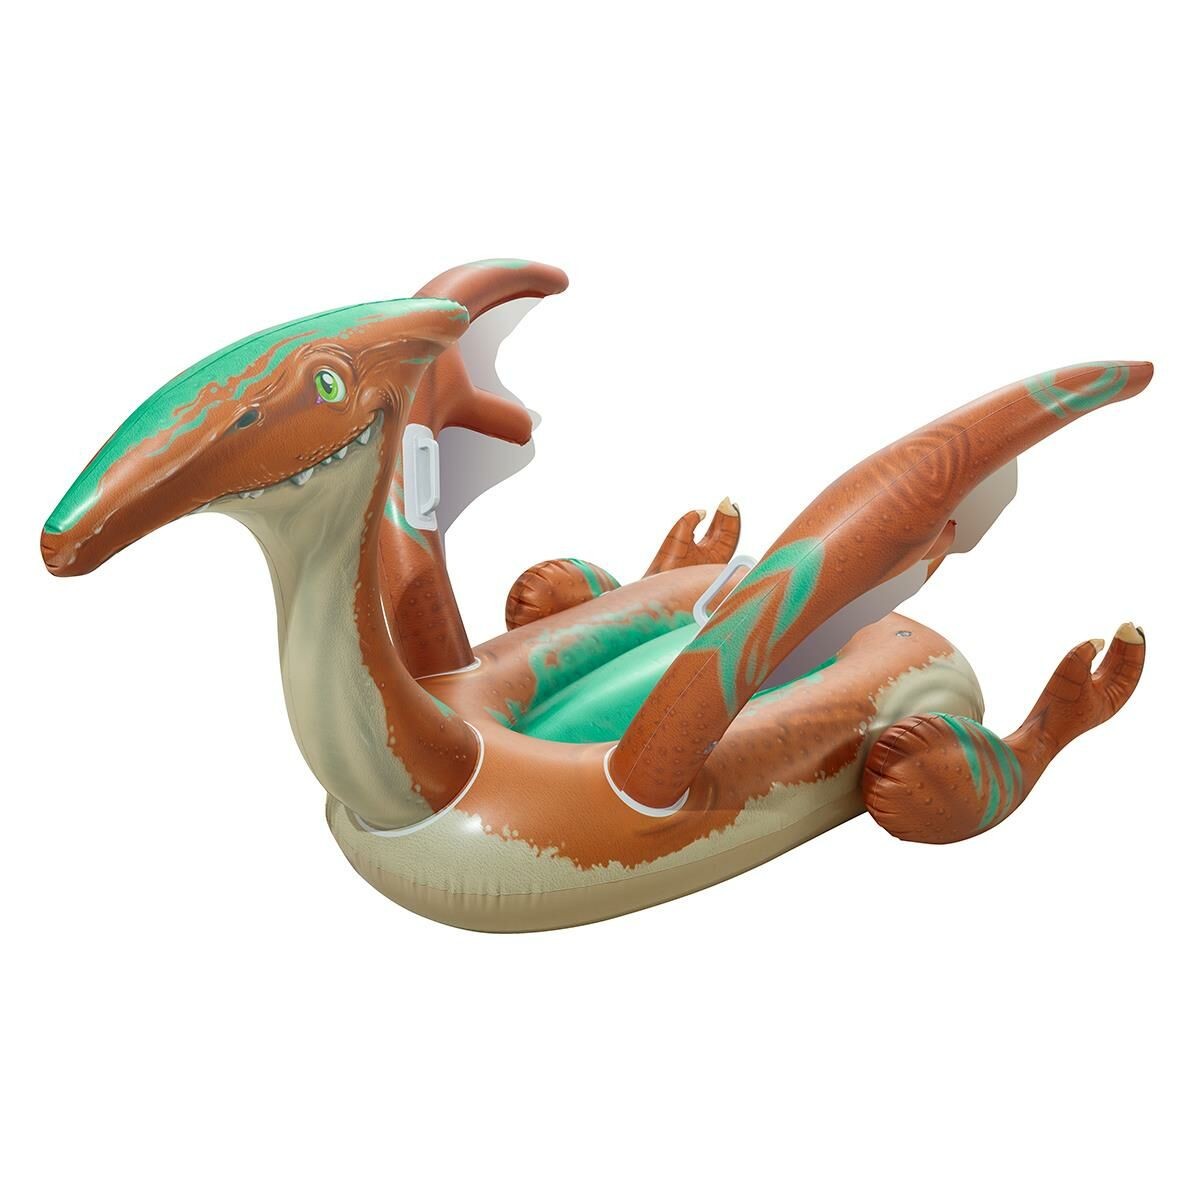 KZL-BW41105 RIDING DINASAUR 135X198CM WITH 6 WINGS